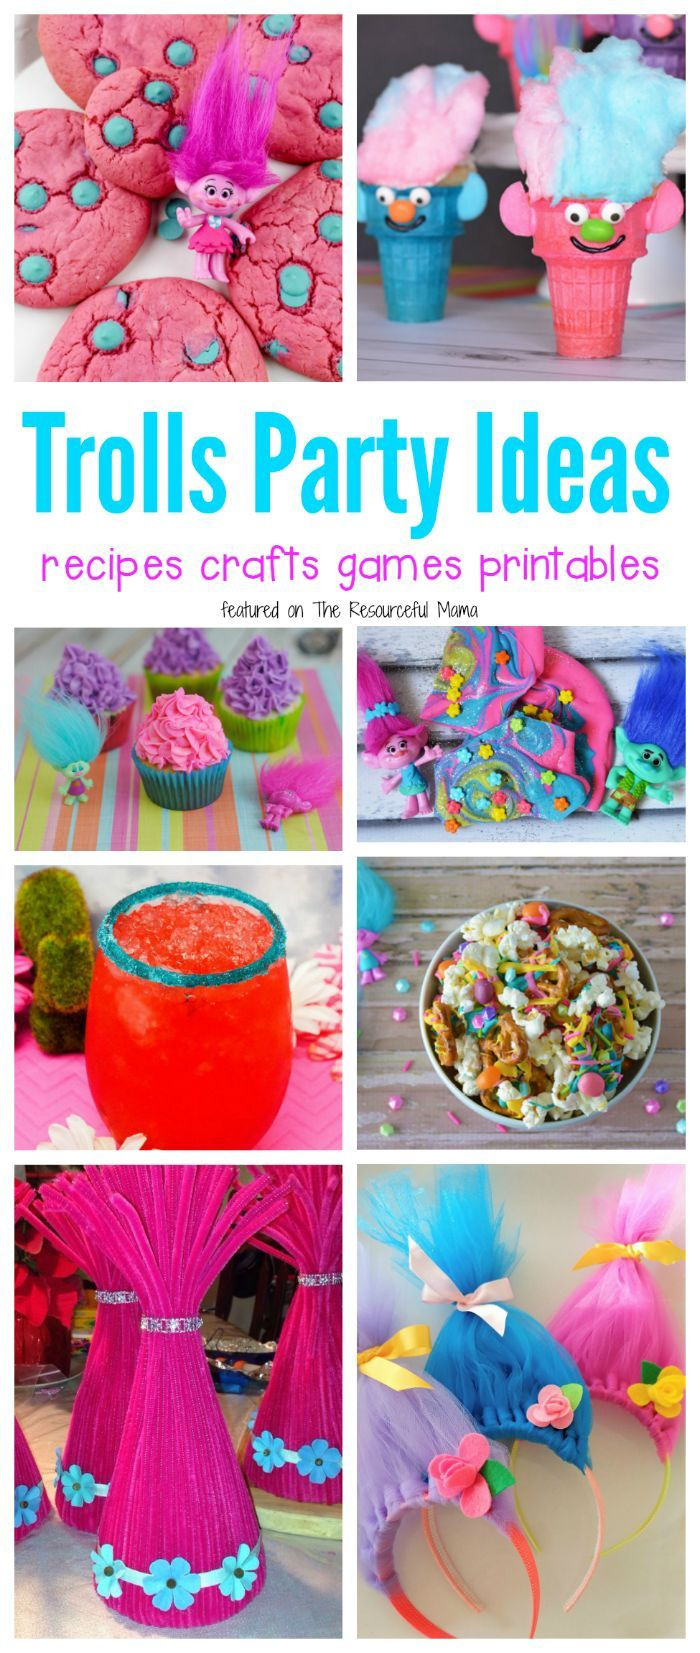 Trolls Birthday Party Games
 77 best images about Trolls on Pinterest